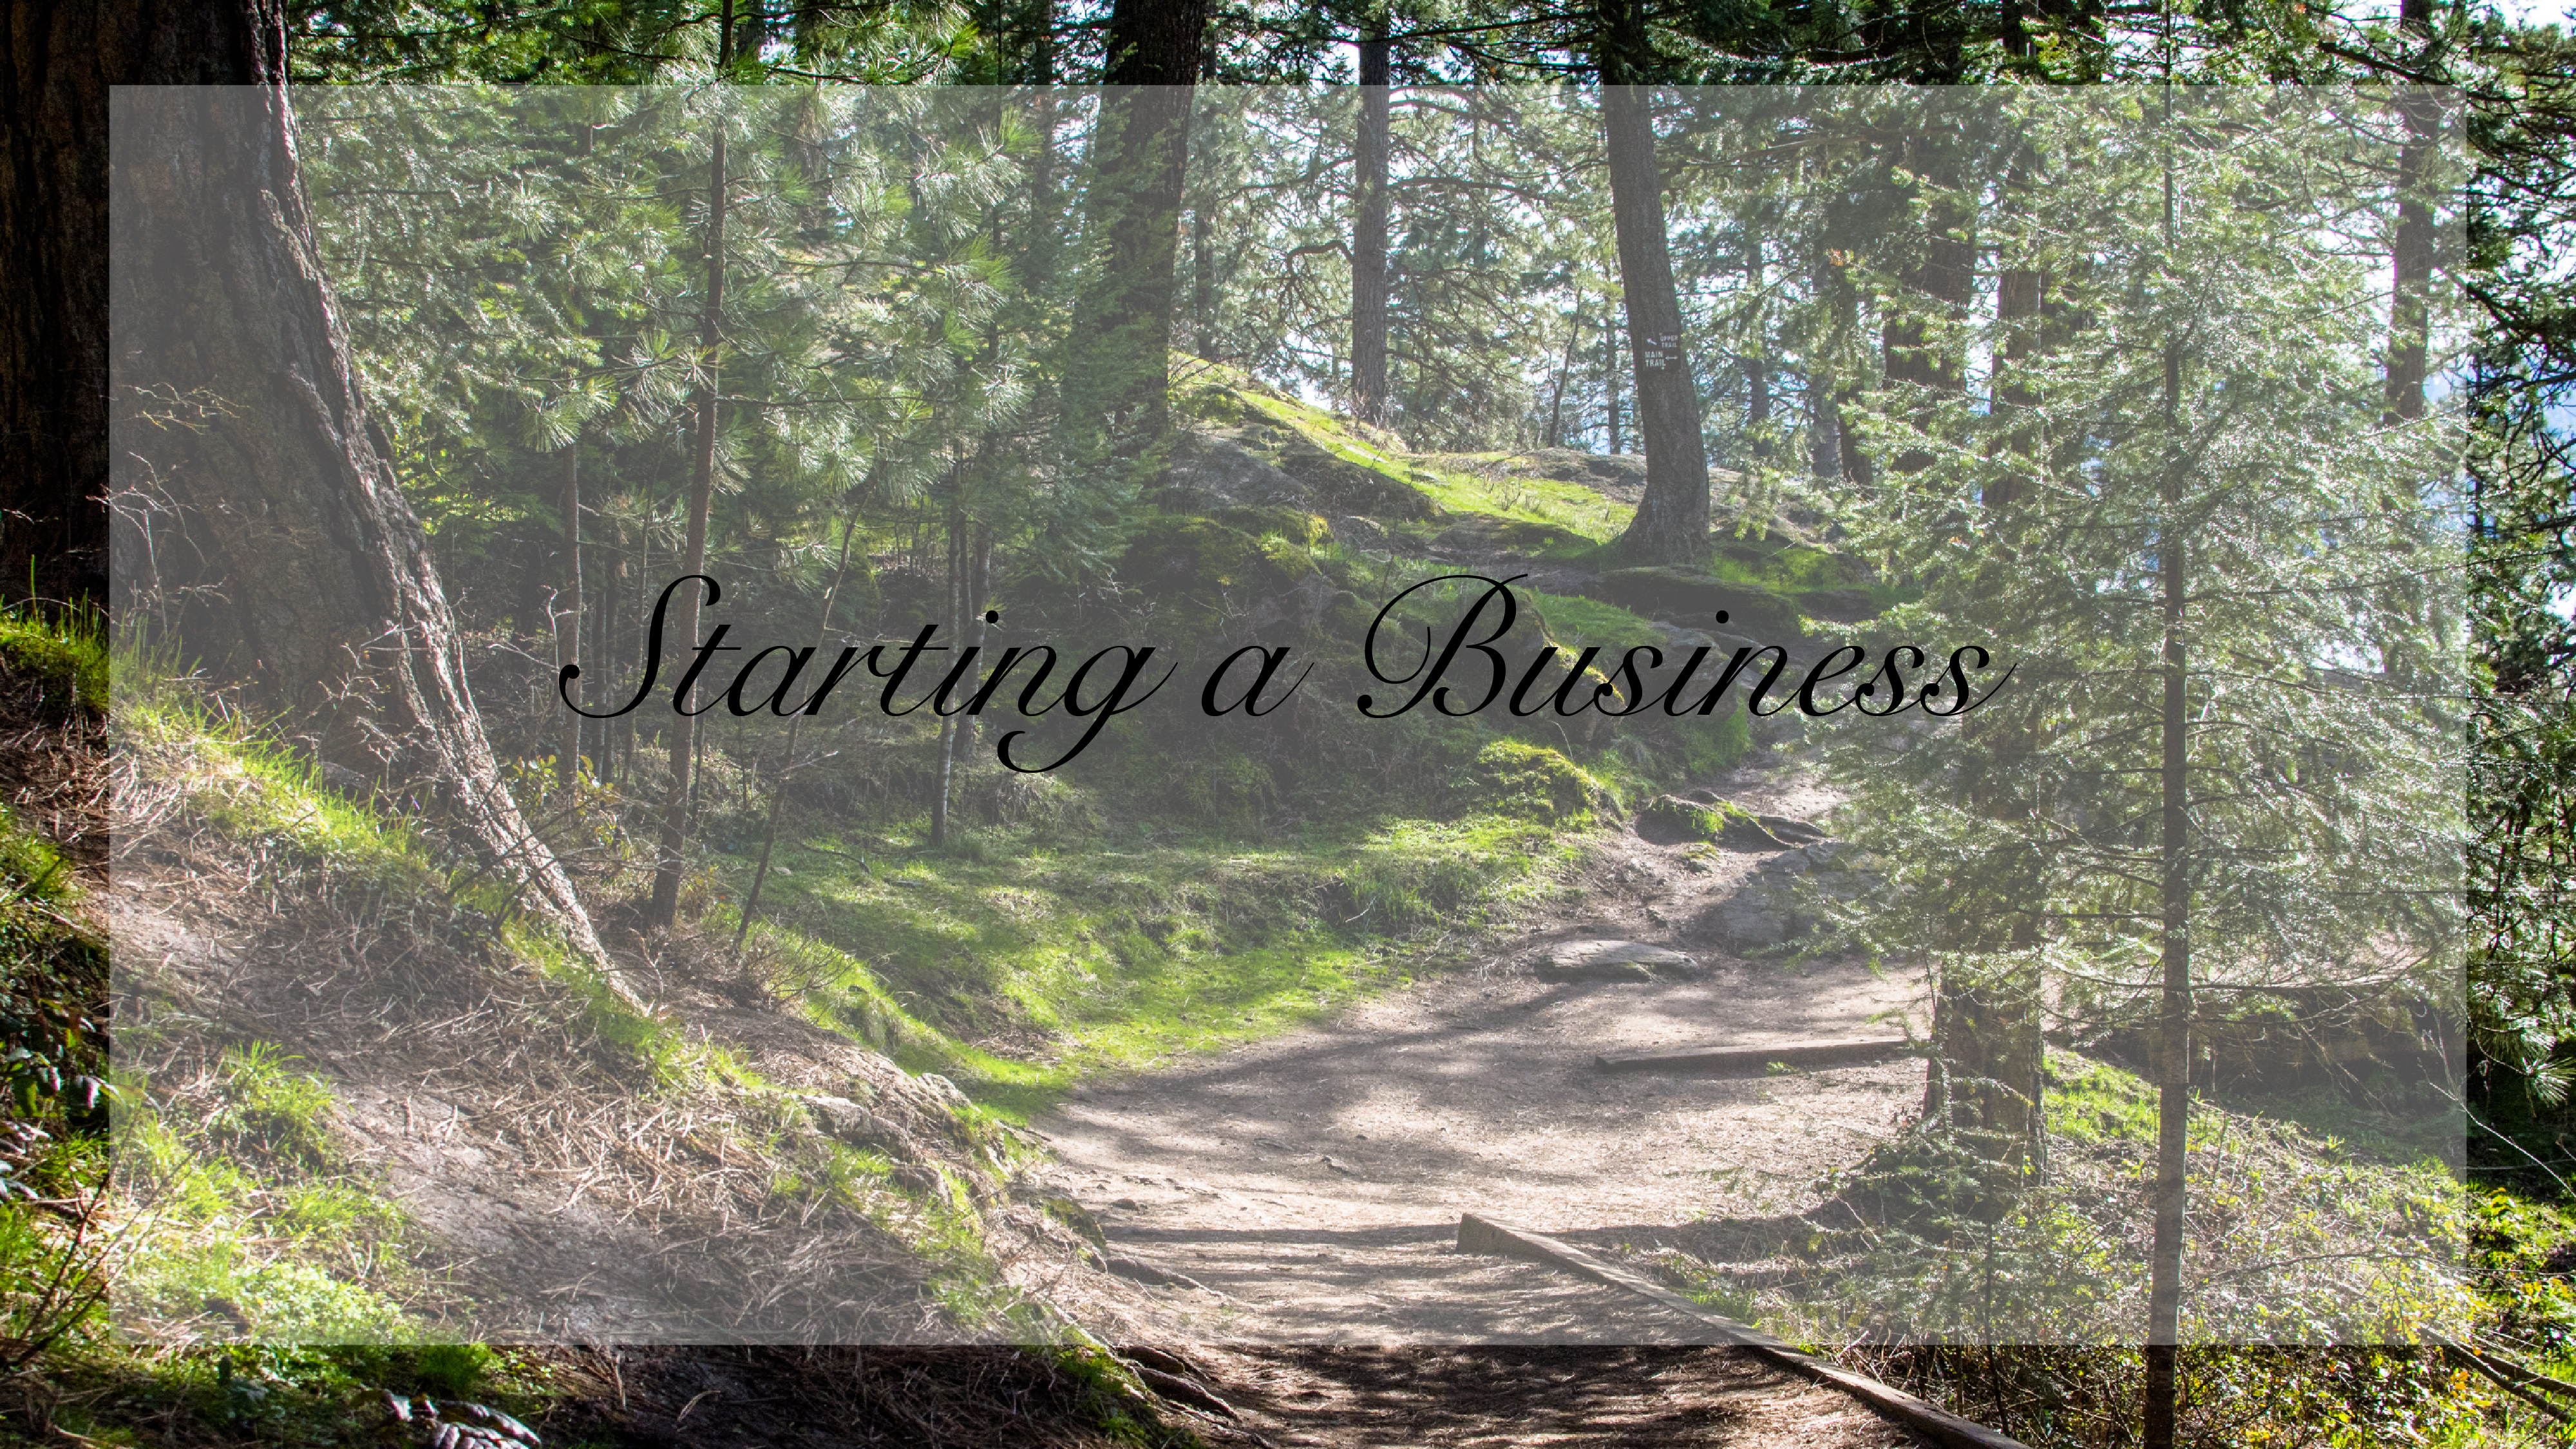 Starting a Business | The Dalles Photography